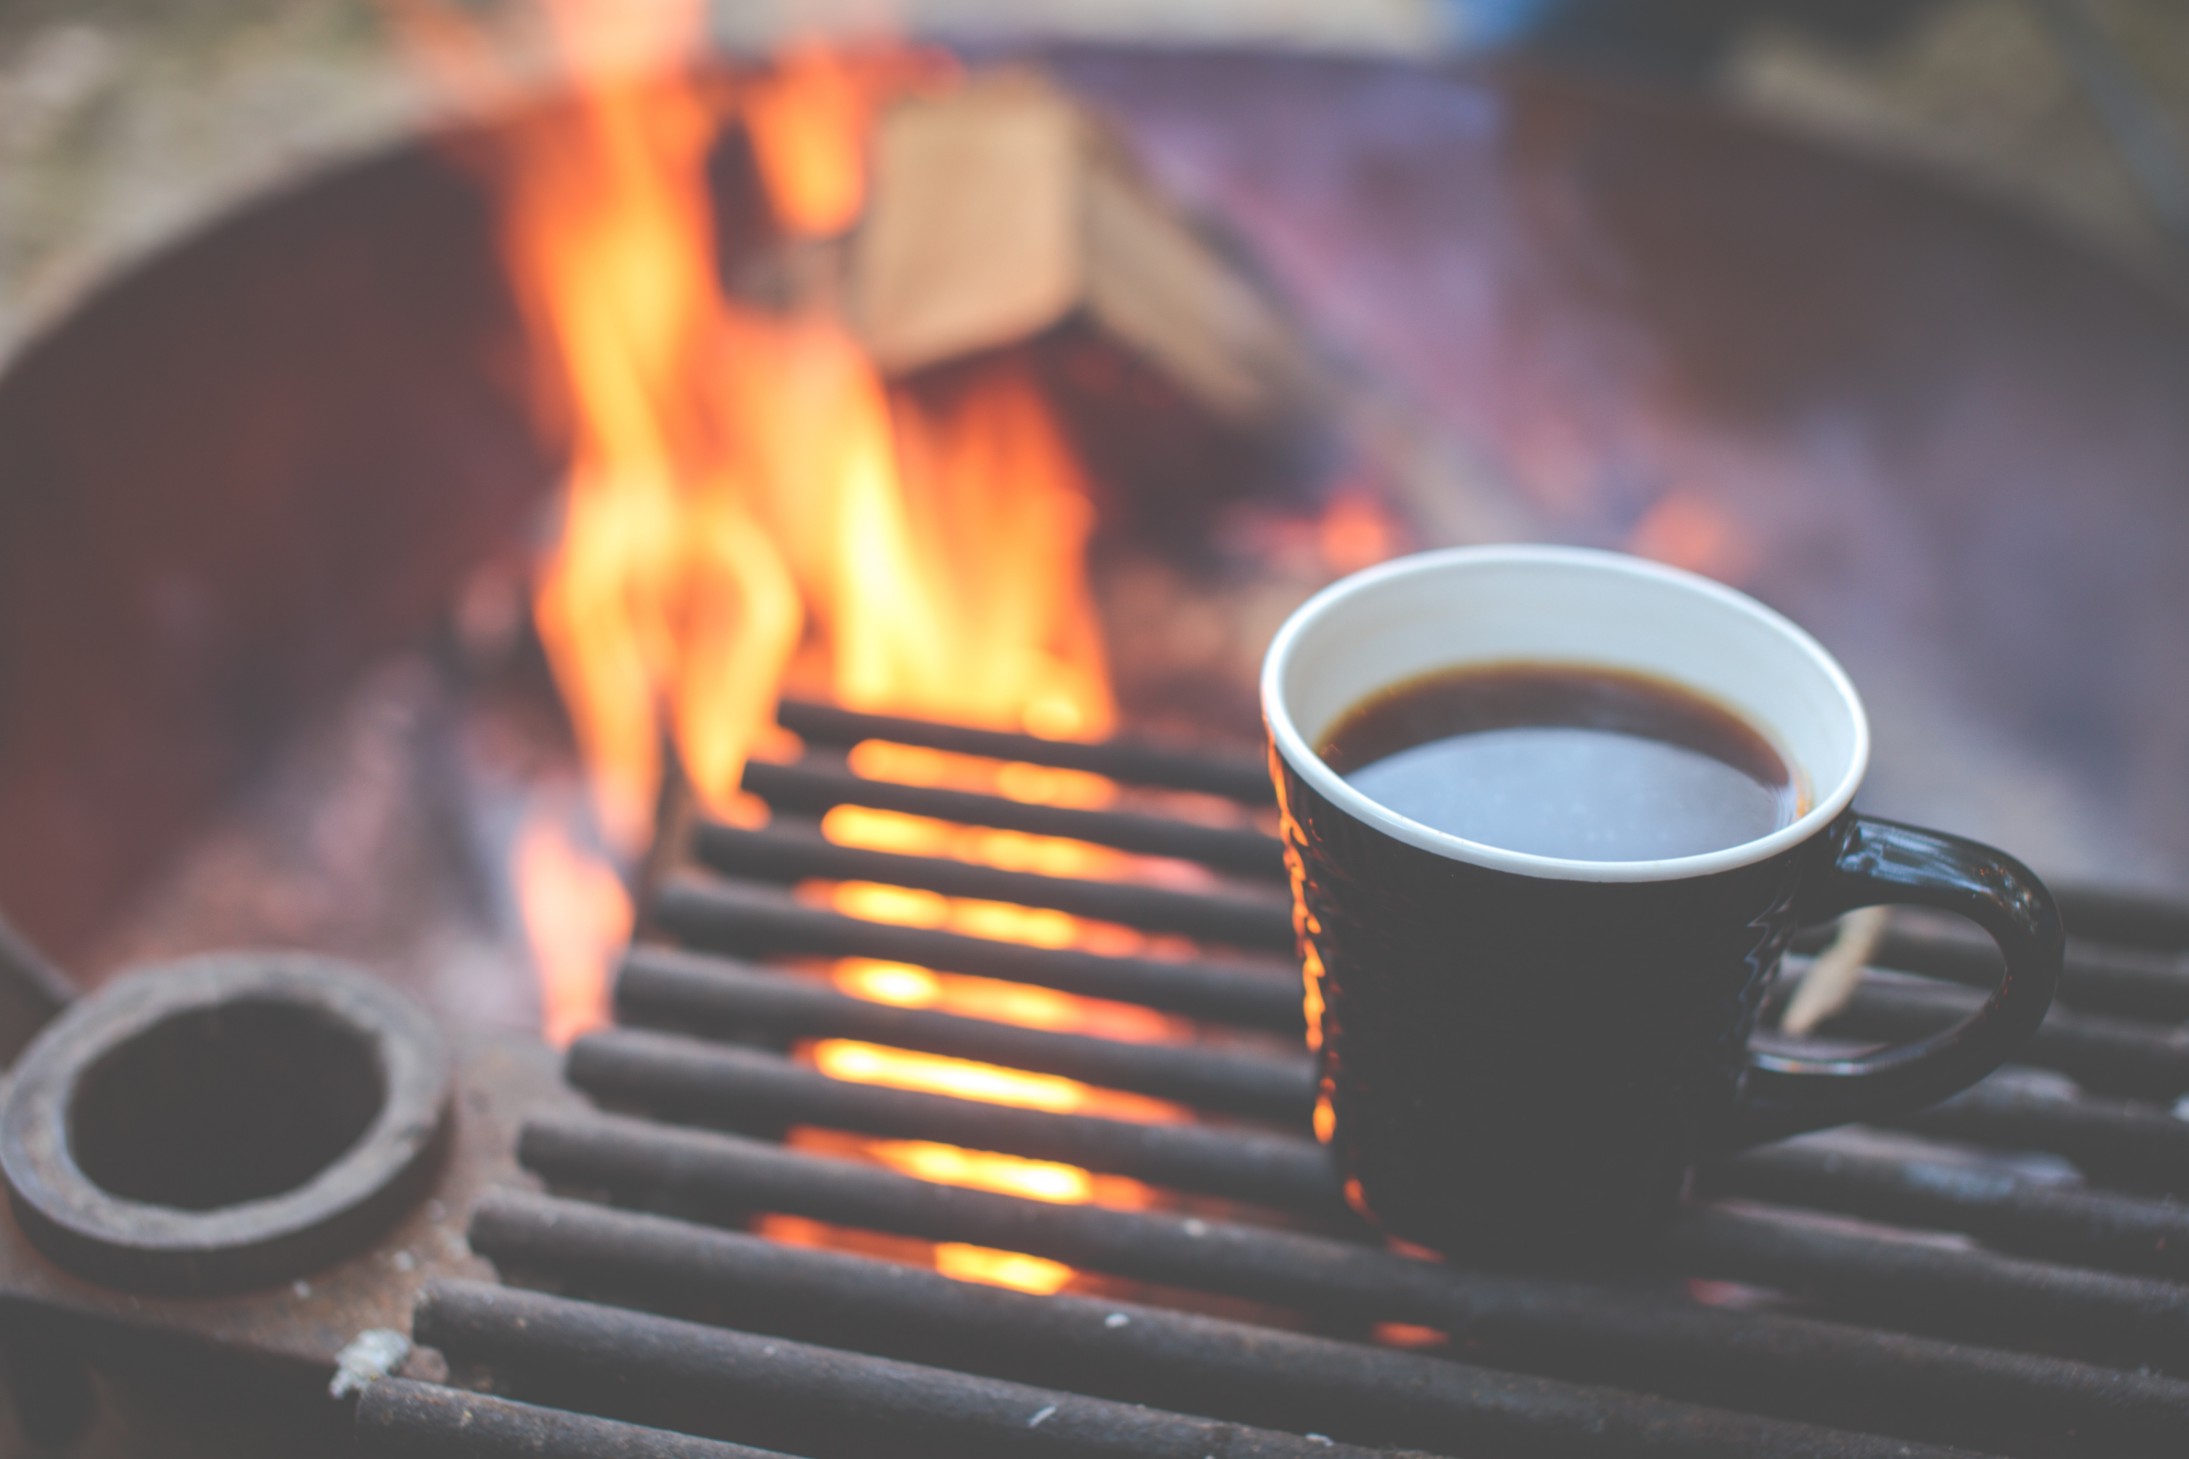 How to make coffee while camping without fire. 5 basic tips